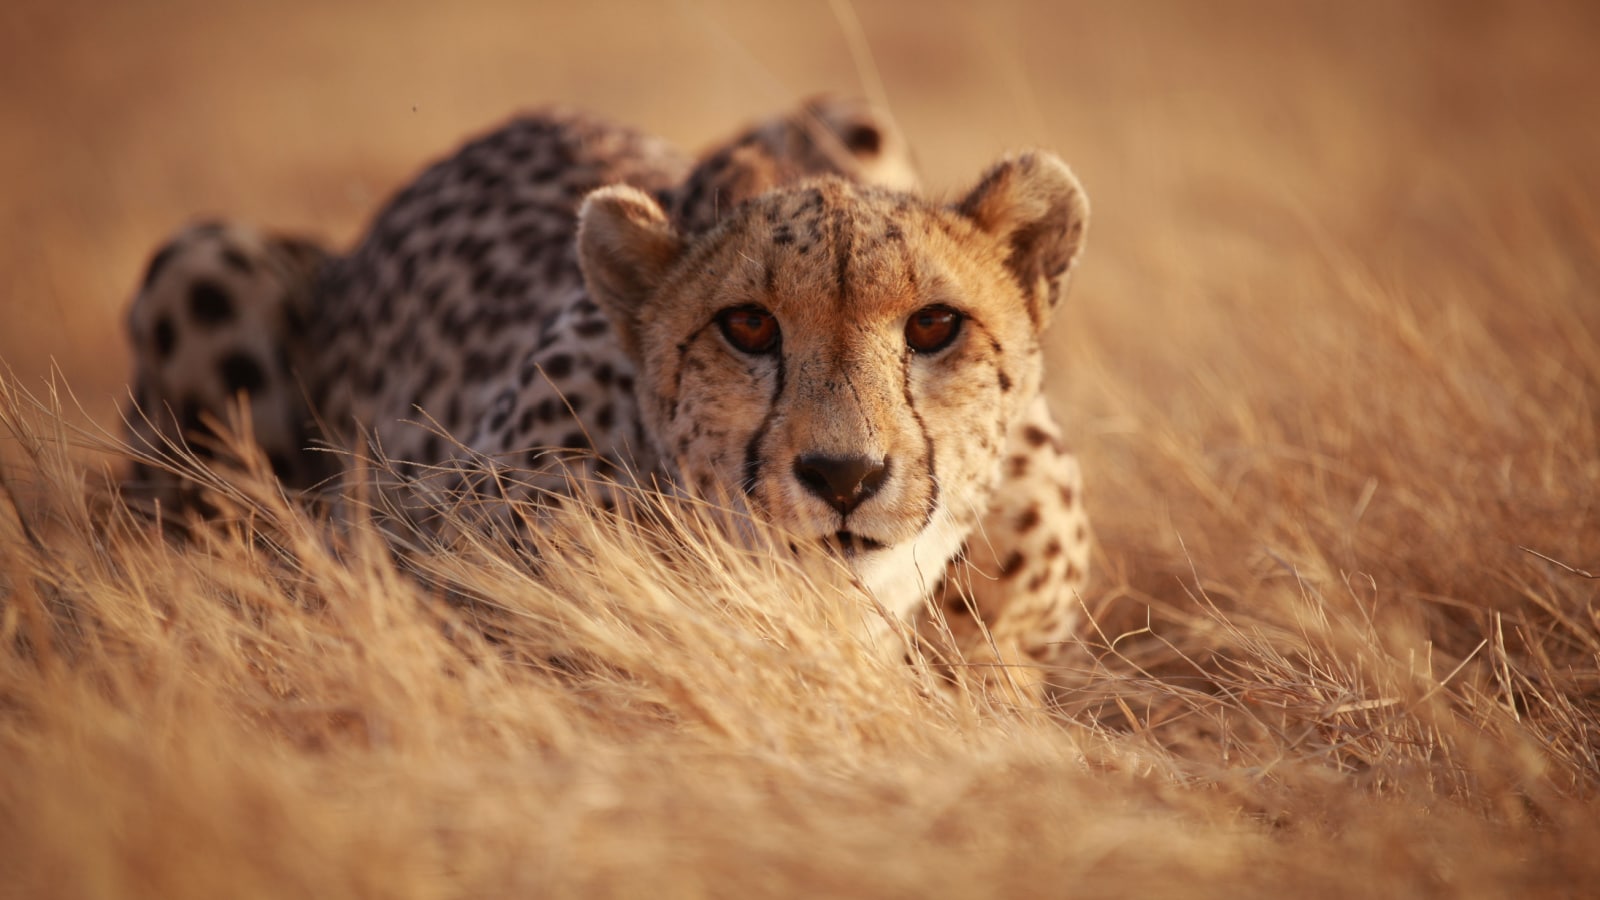 <p>The fastest land animal capable of reaching a speed of up to 70 miles per hour, this sleek and graceful predator is often seen hunting on the open savannah of Africa. Witnessing a chase could keep your blood pumping and your adrenaline hitting the roof.</p>